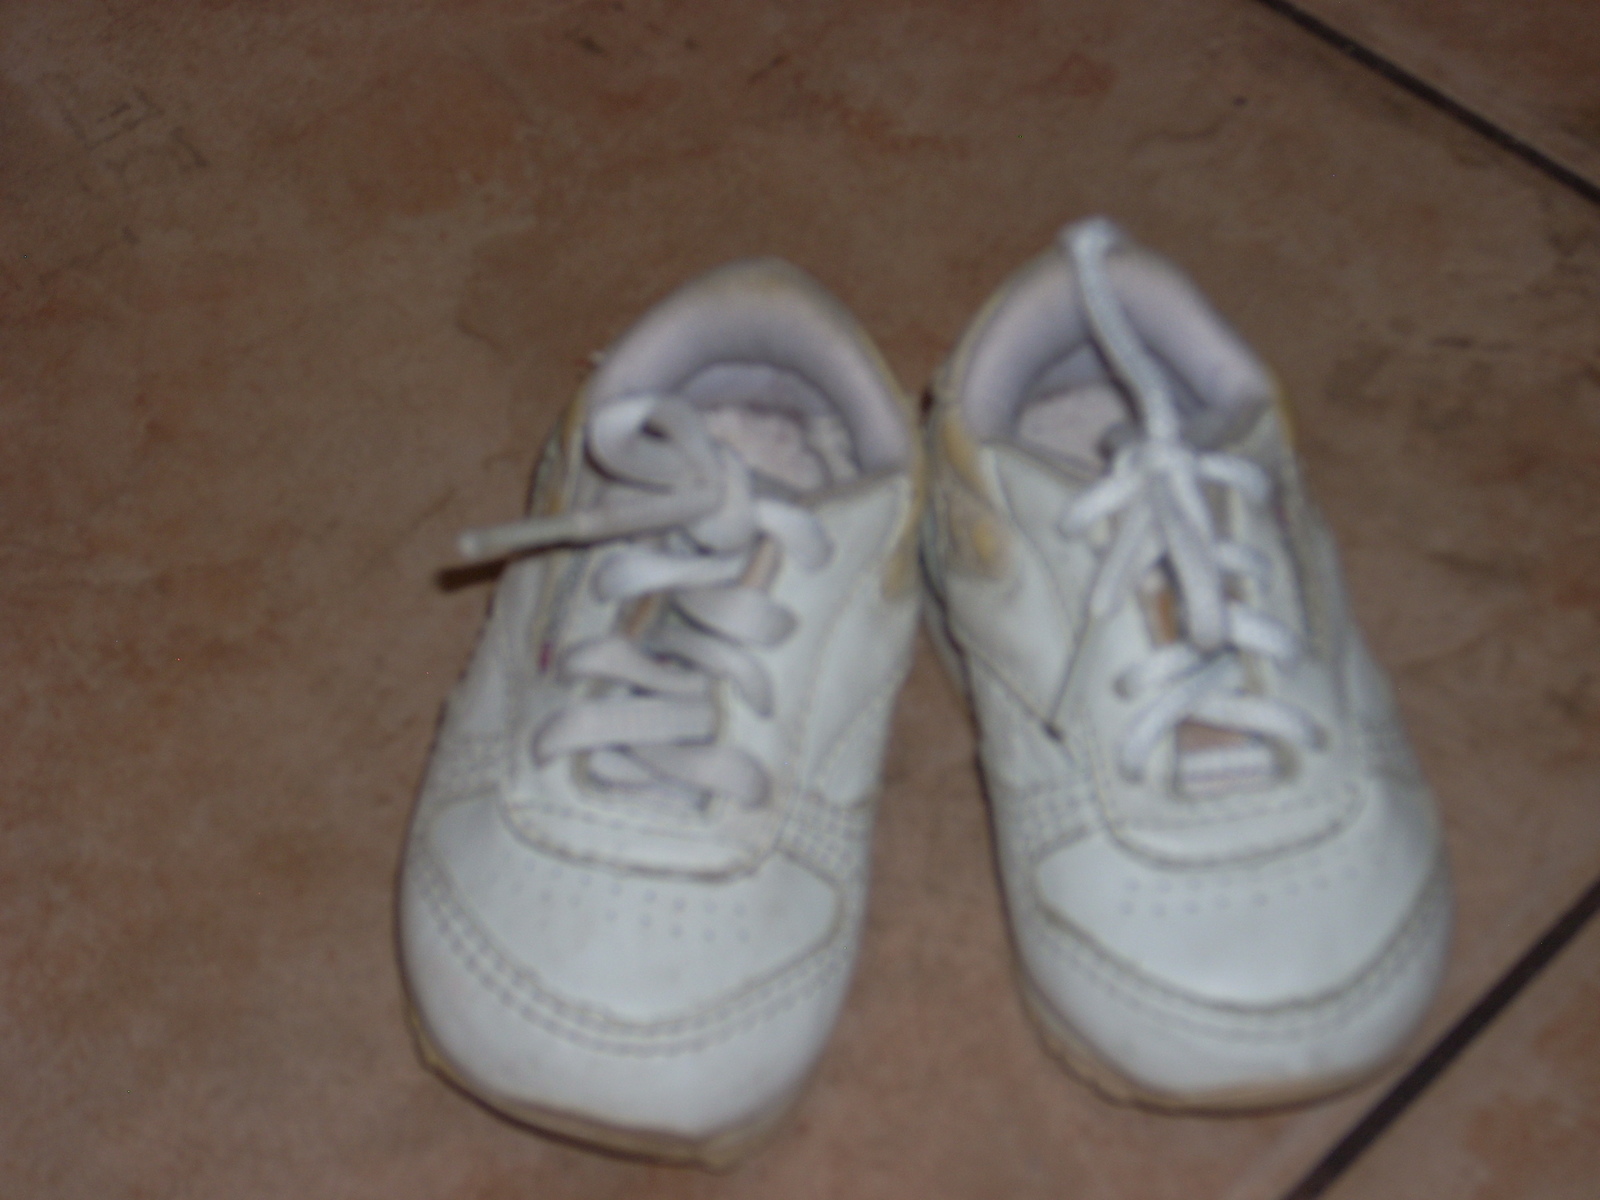 baby shoes reebok tennis shoes size 2 white lace up - $12.00